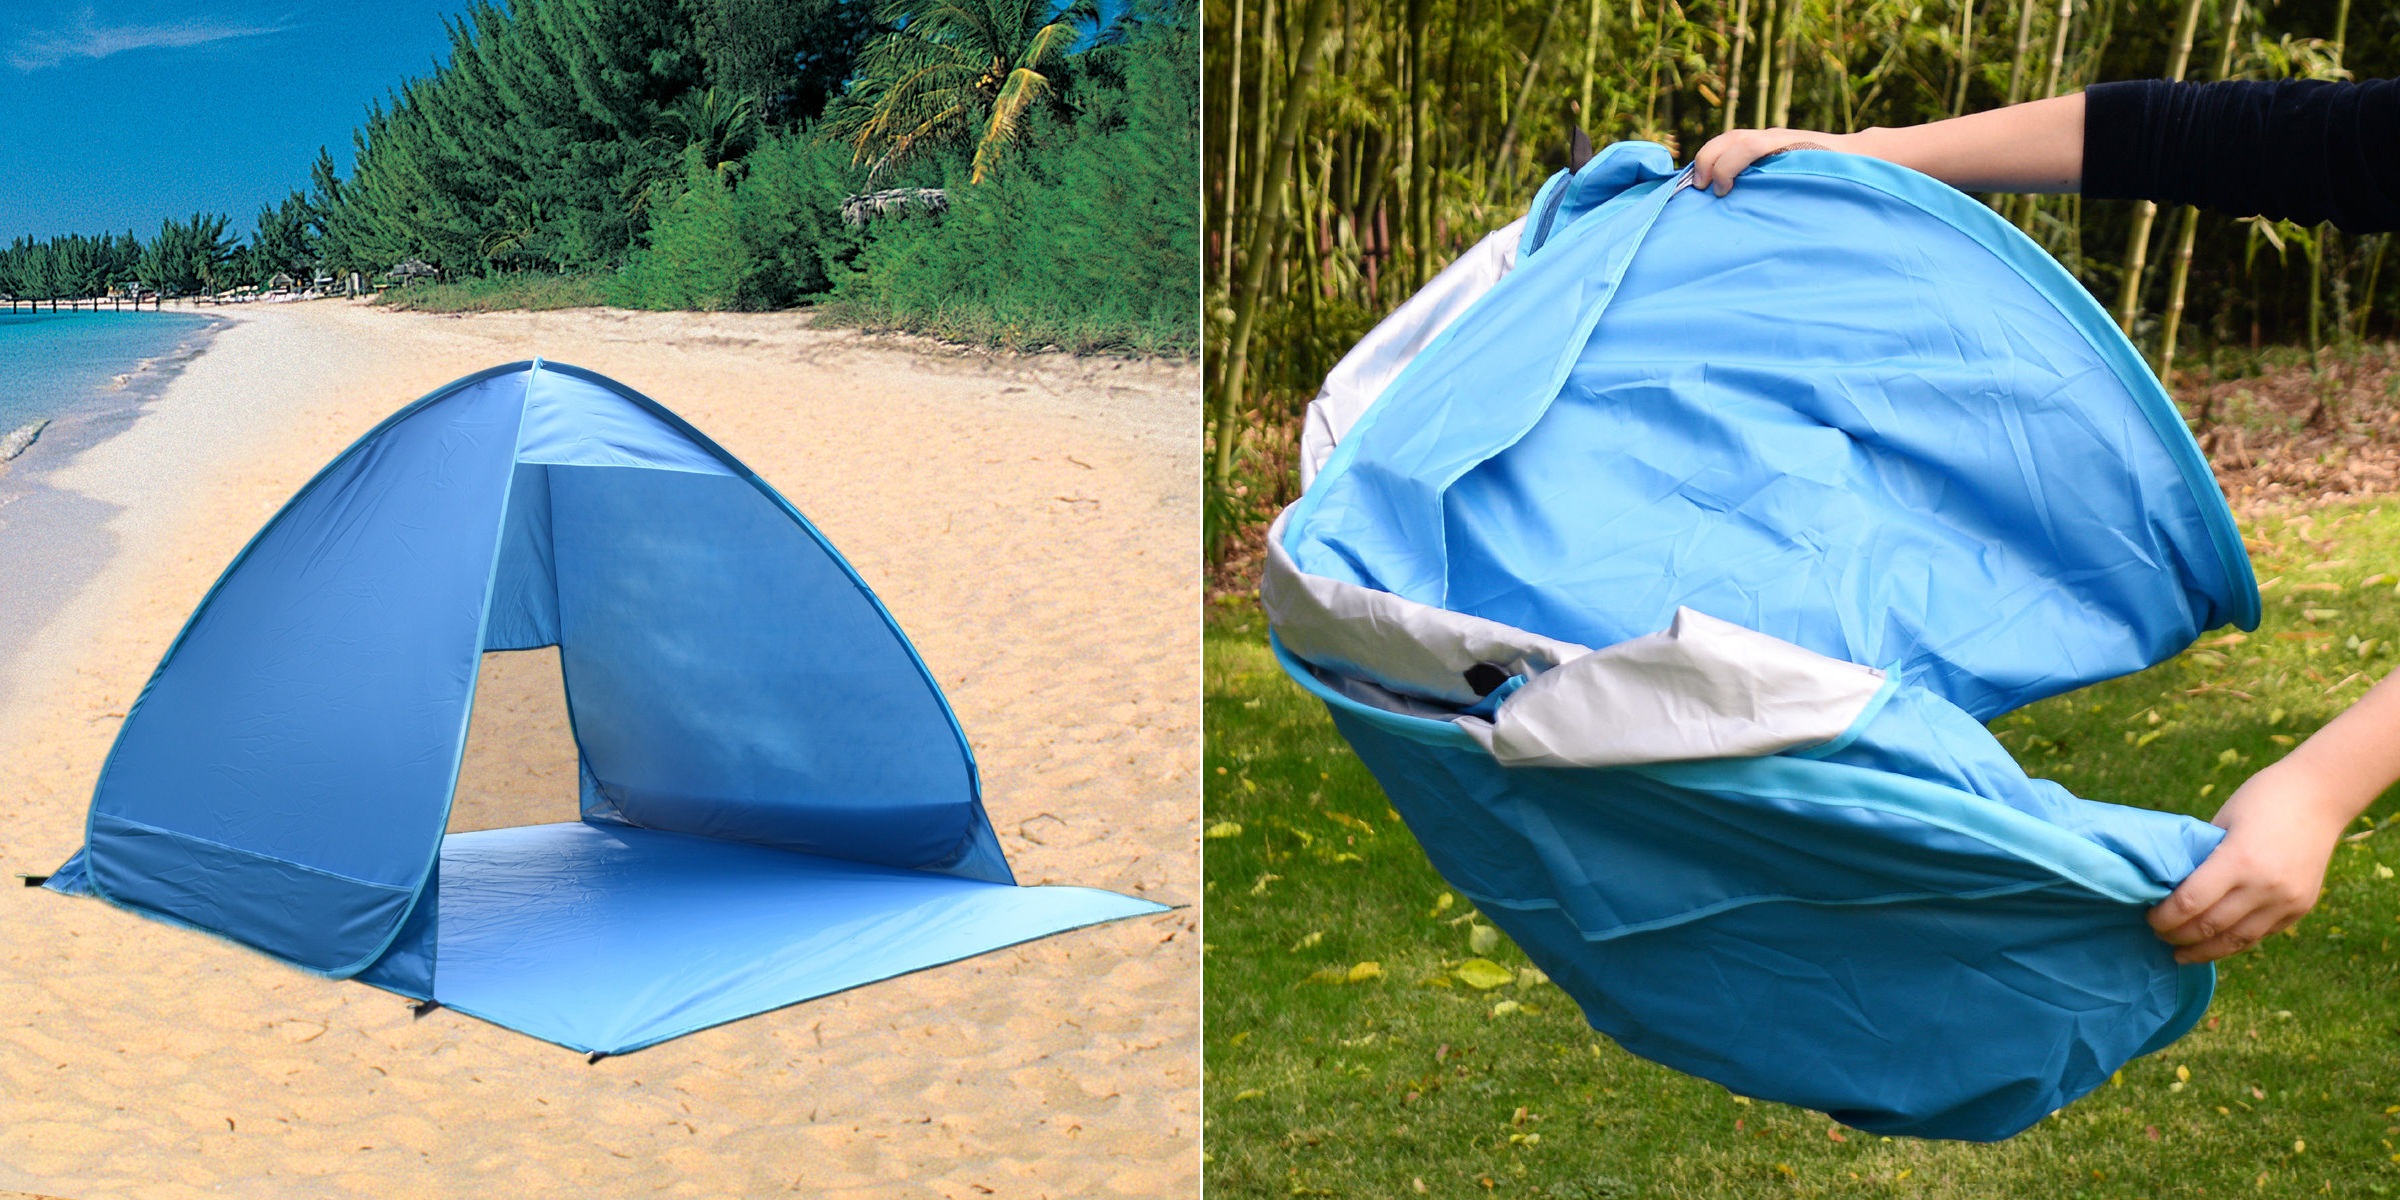 Portable Pop Up Shade Canopy Tent Only $14.49 SHIPPED! - Common Sense